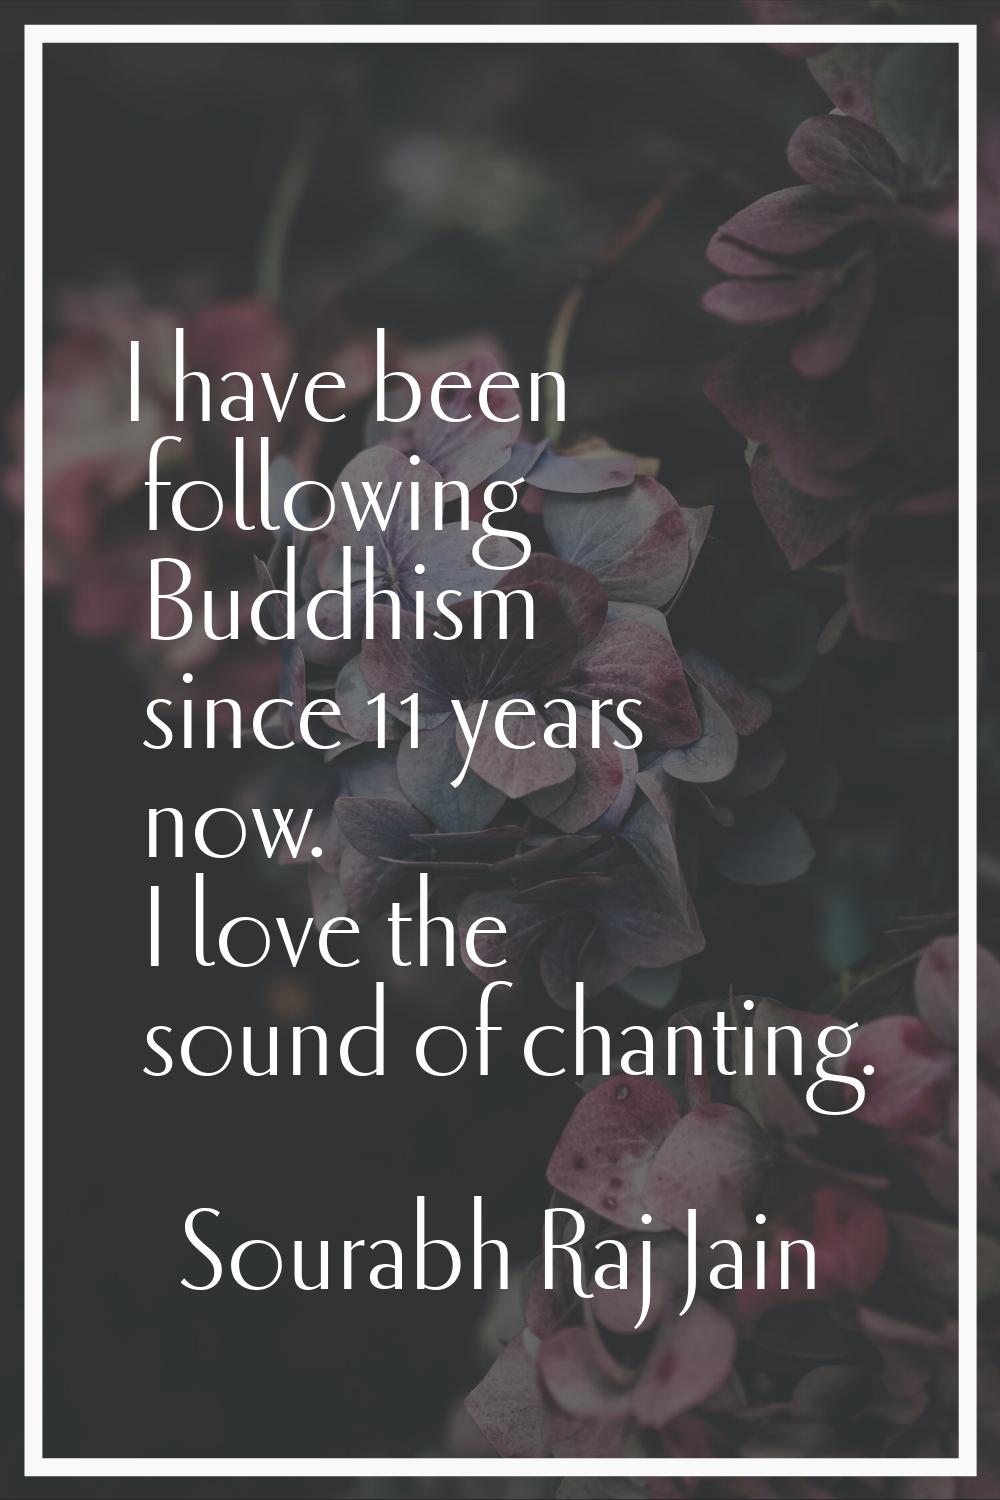 I have been following Buddhism since 11 years now. I love the sound of chanting.